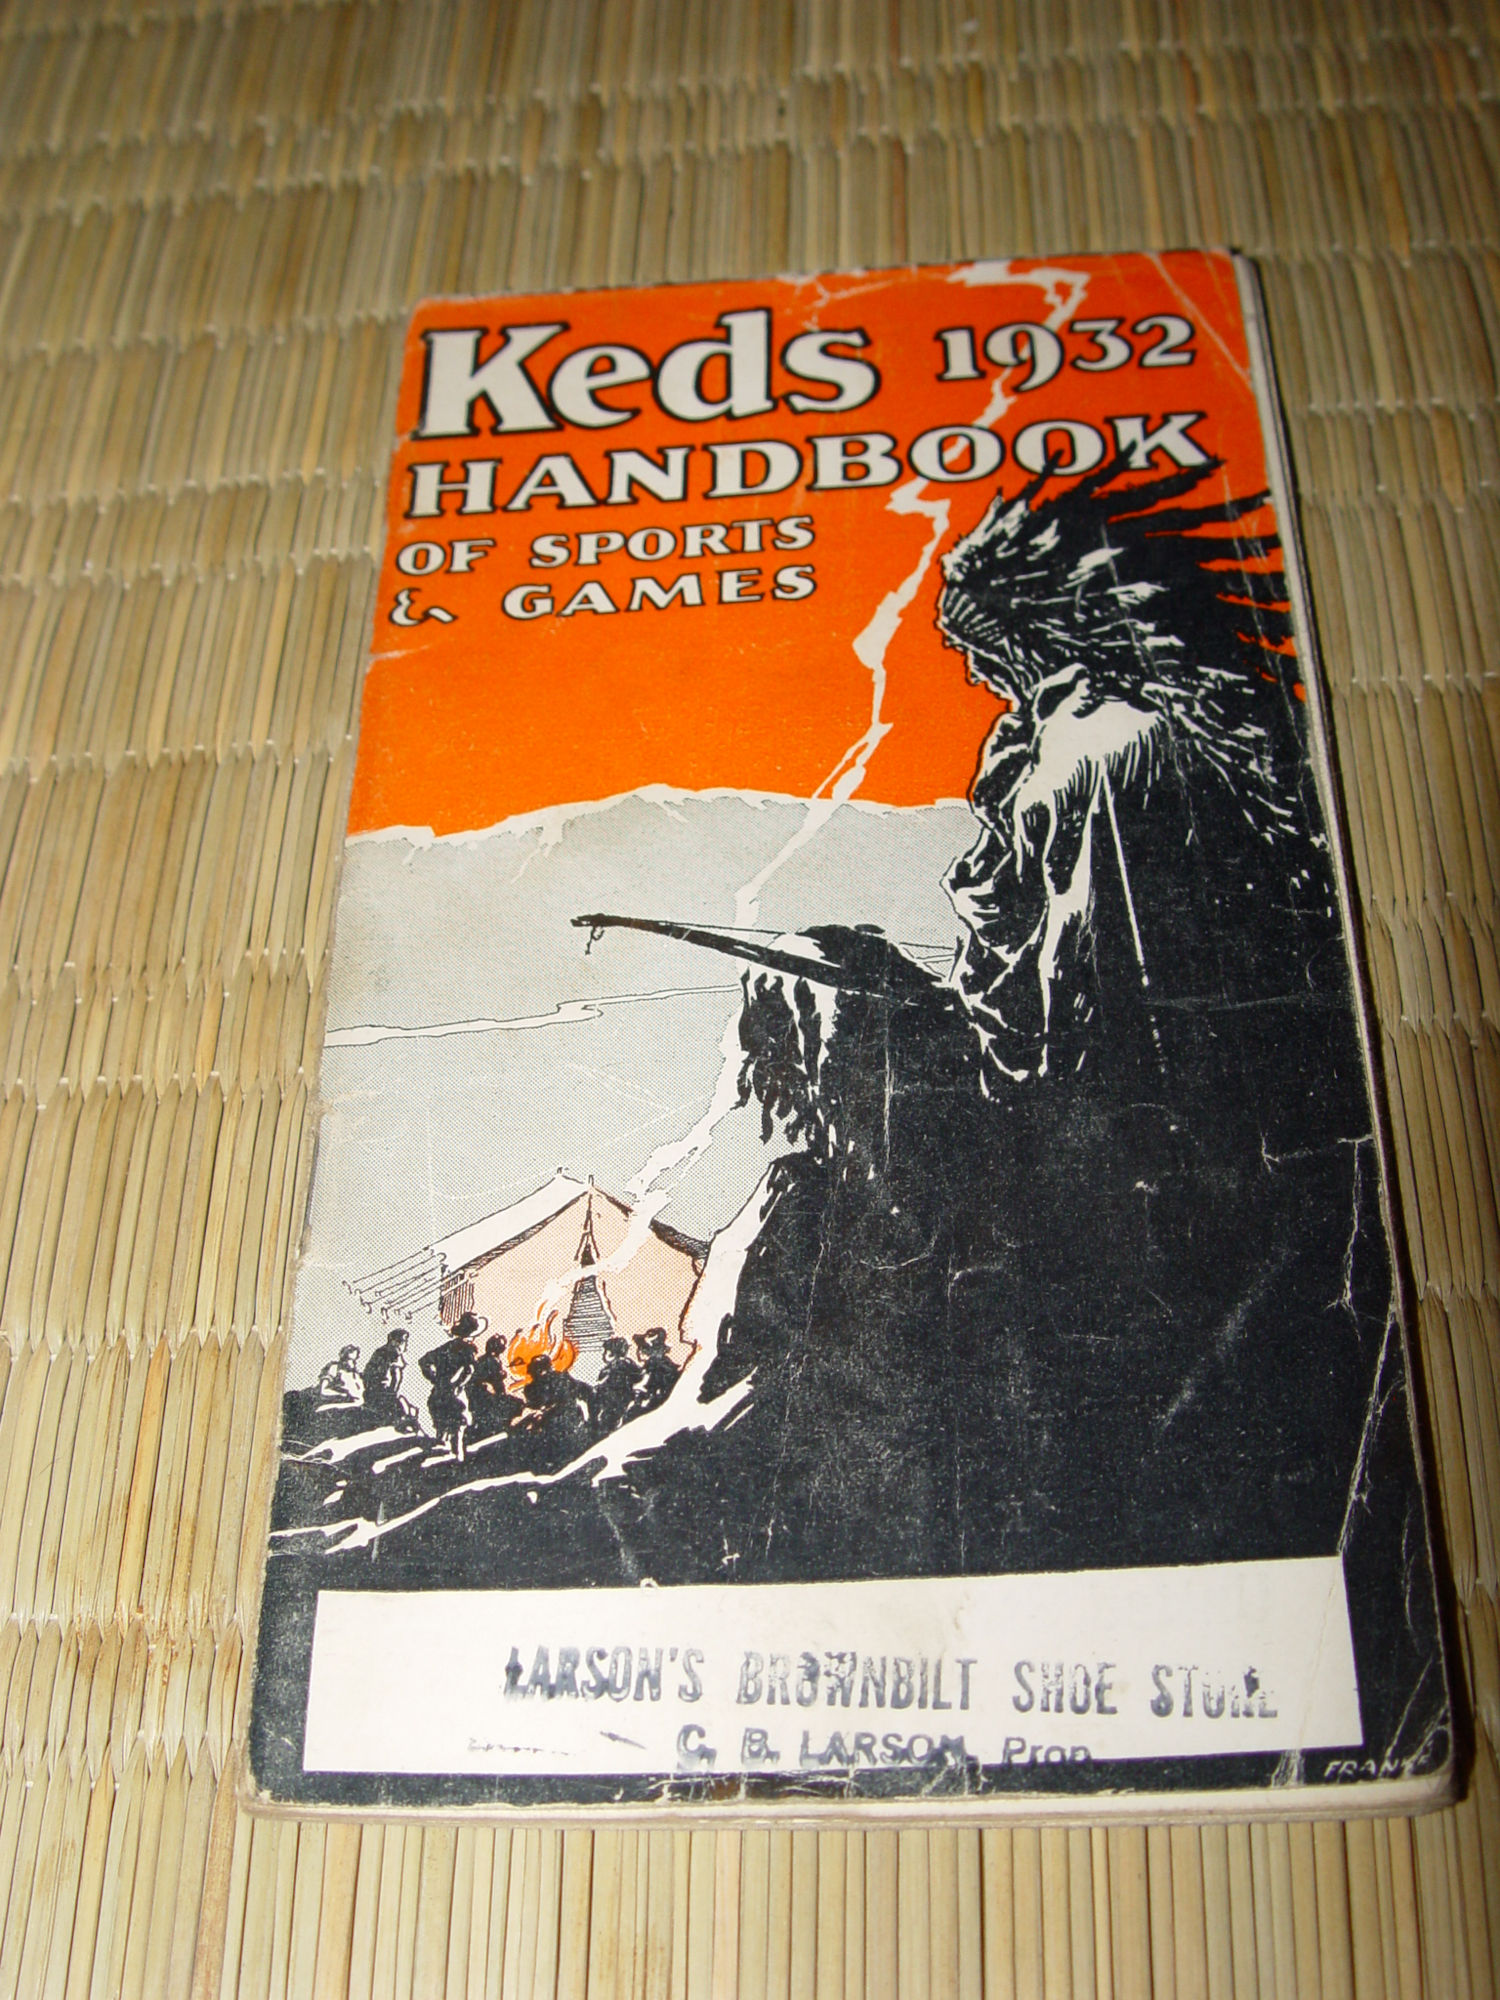 KEDS sneakers 1932 HANDBOOK of SPORTS & GAMES
                pamphlet rare